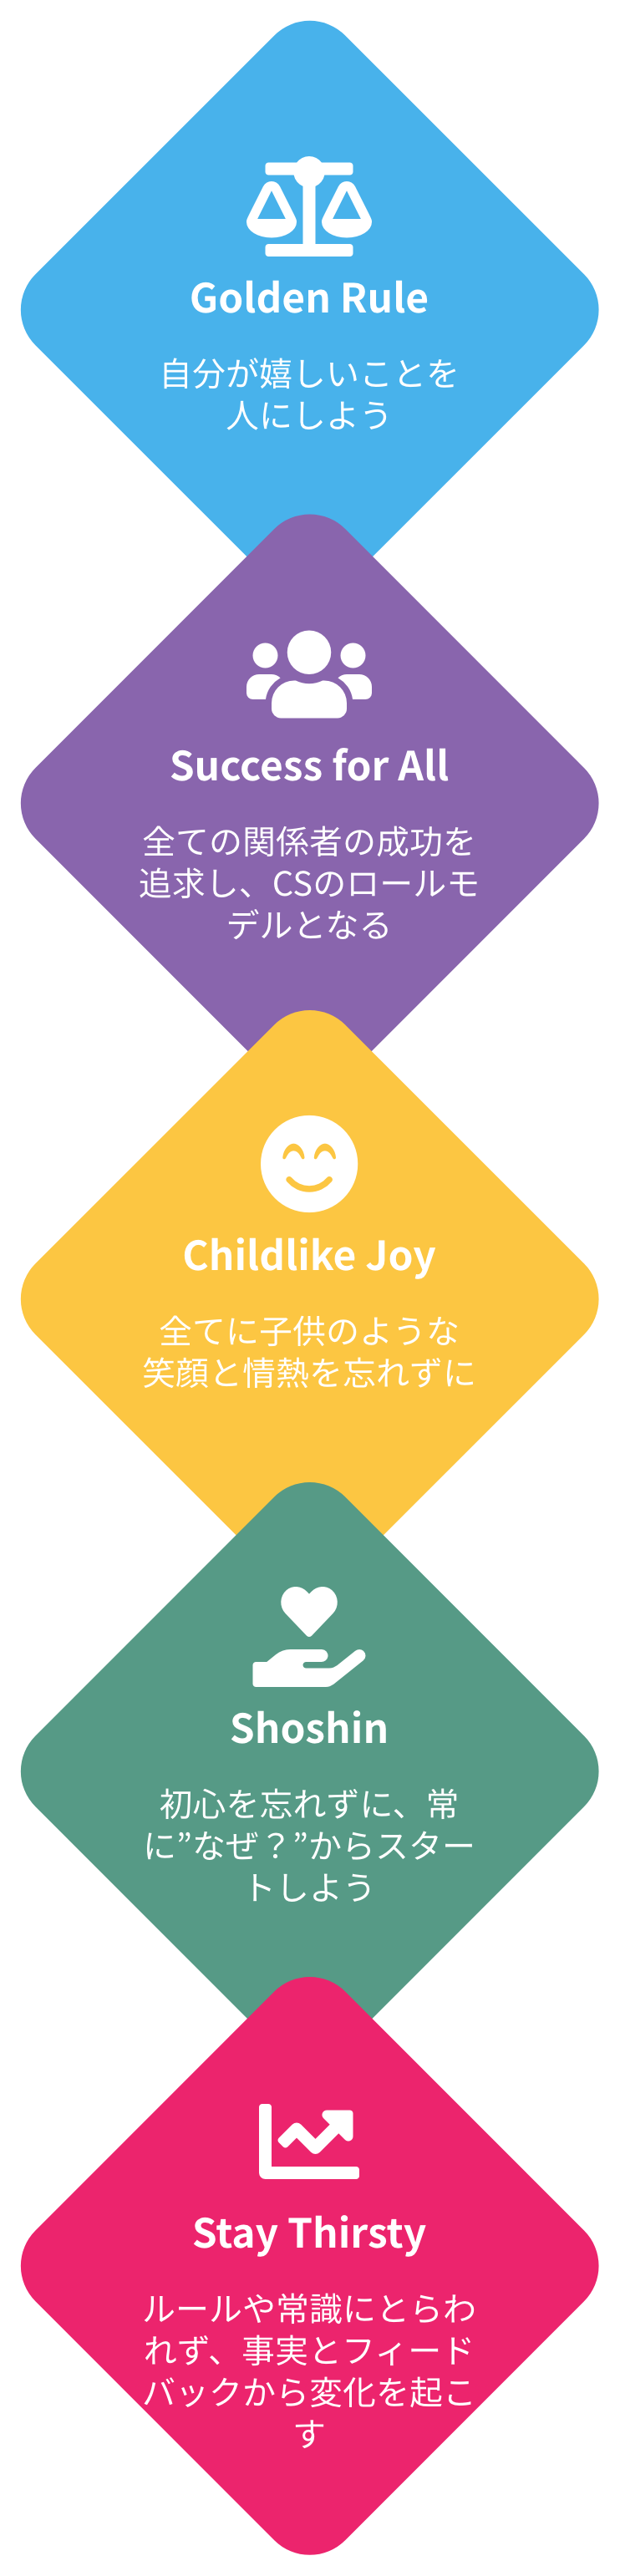 Golden Rule, Success for All, Childlike Joy, Shoshin, Stay Thirsty